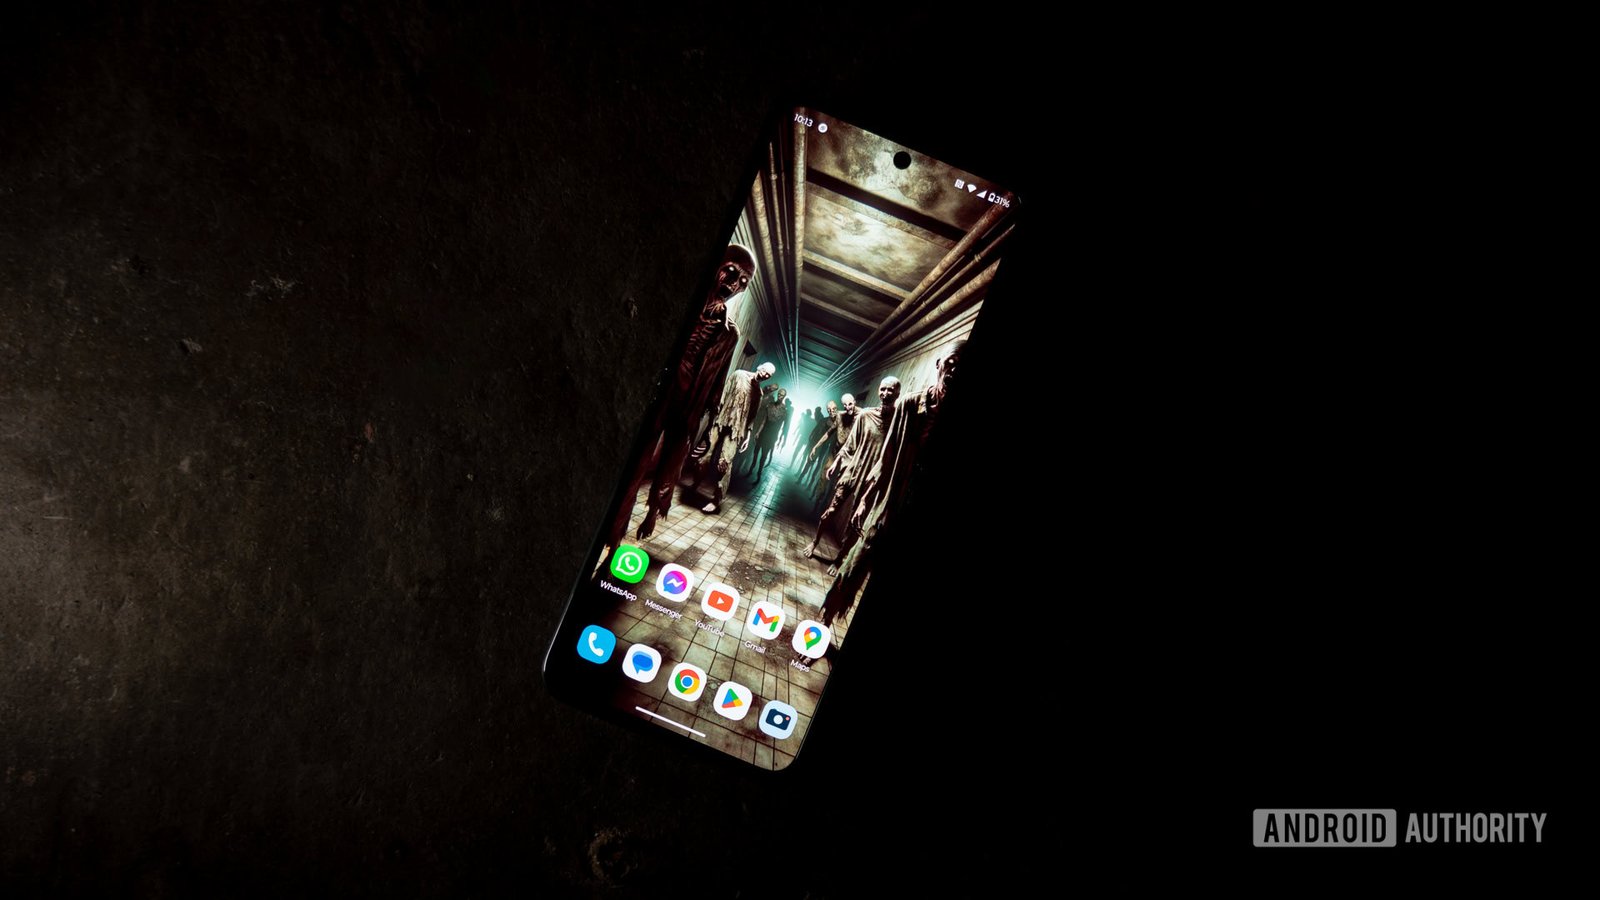 Download these scary wallpapers for your phone